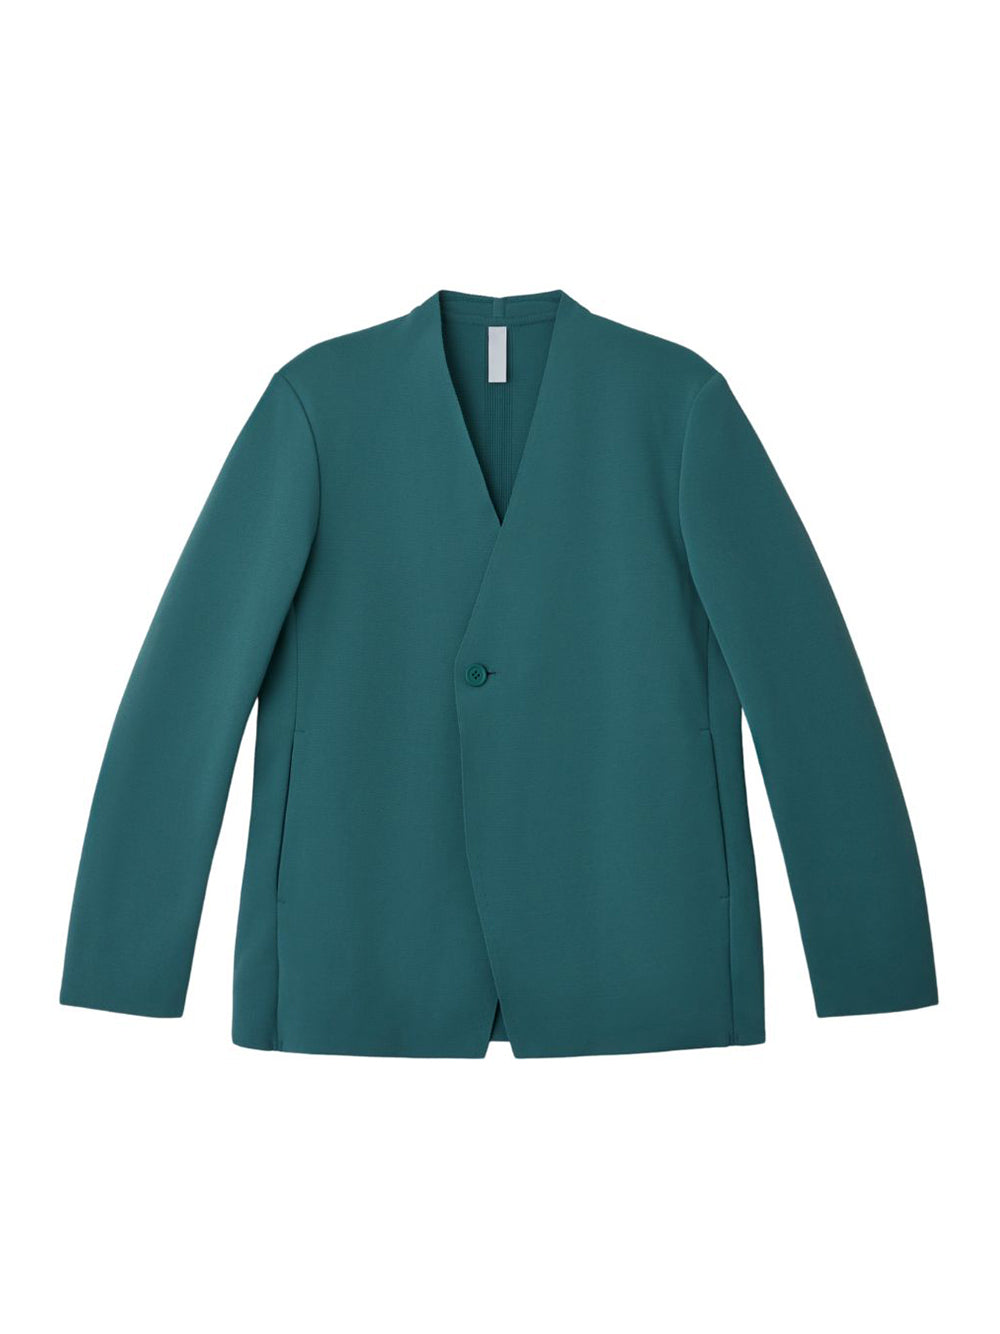 Milan Rib Double Breasted Collarless Jacket (Moss Green)